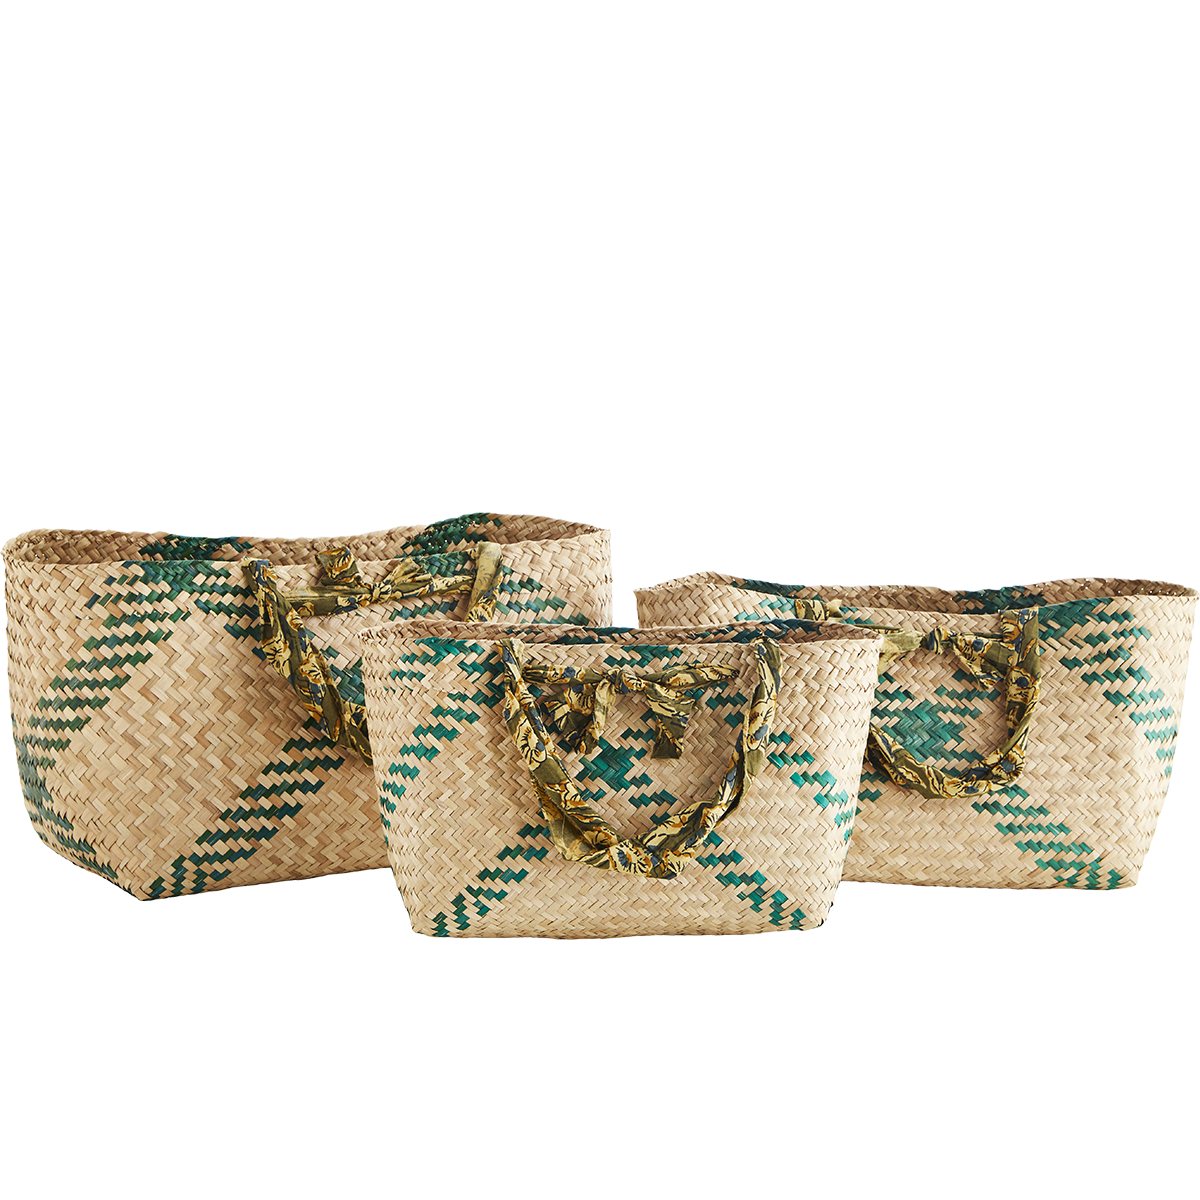 Seagrass bags w/ handles